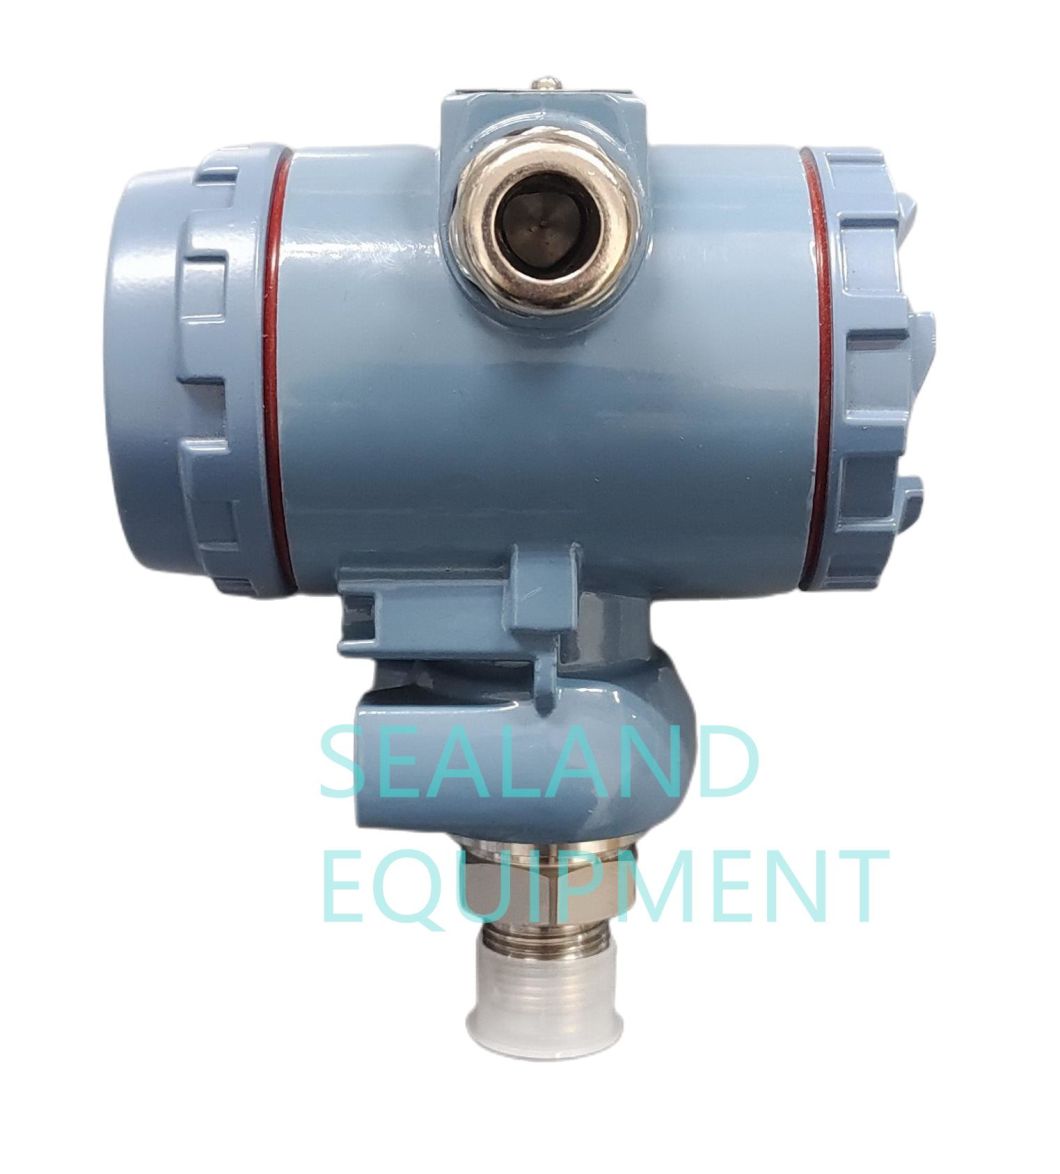 4-20mA OEM Industrial/ Marine Pressure Transducer for Oil or Gas Yszk-01g-C